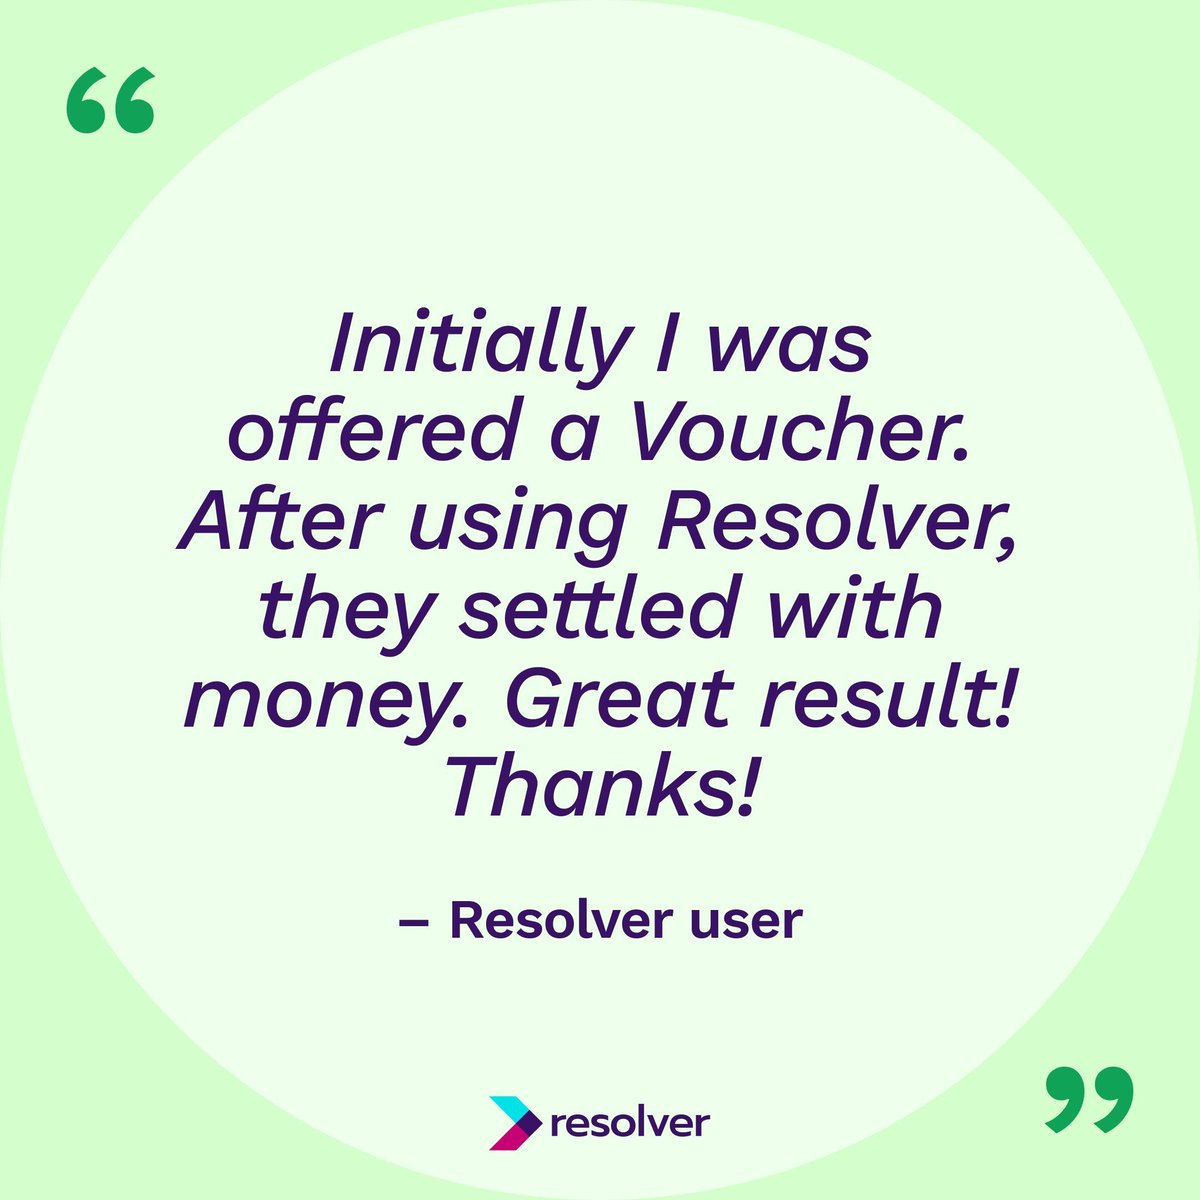 Didn’t get the outcome you hoped for? We’re here to help! Don’t settle for second best, put Resolver to the test! Raise your complaint today 👉 buff.ly/2OQK8ic